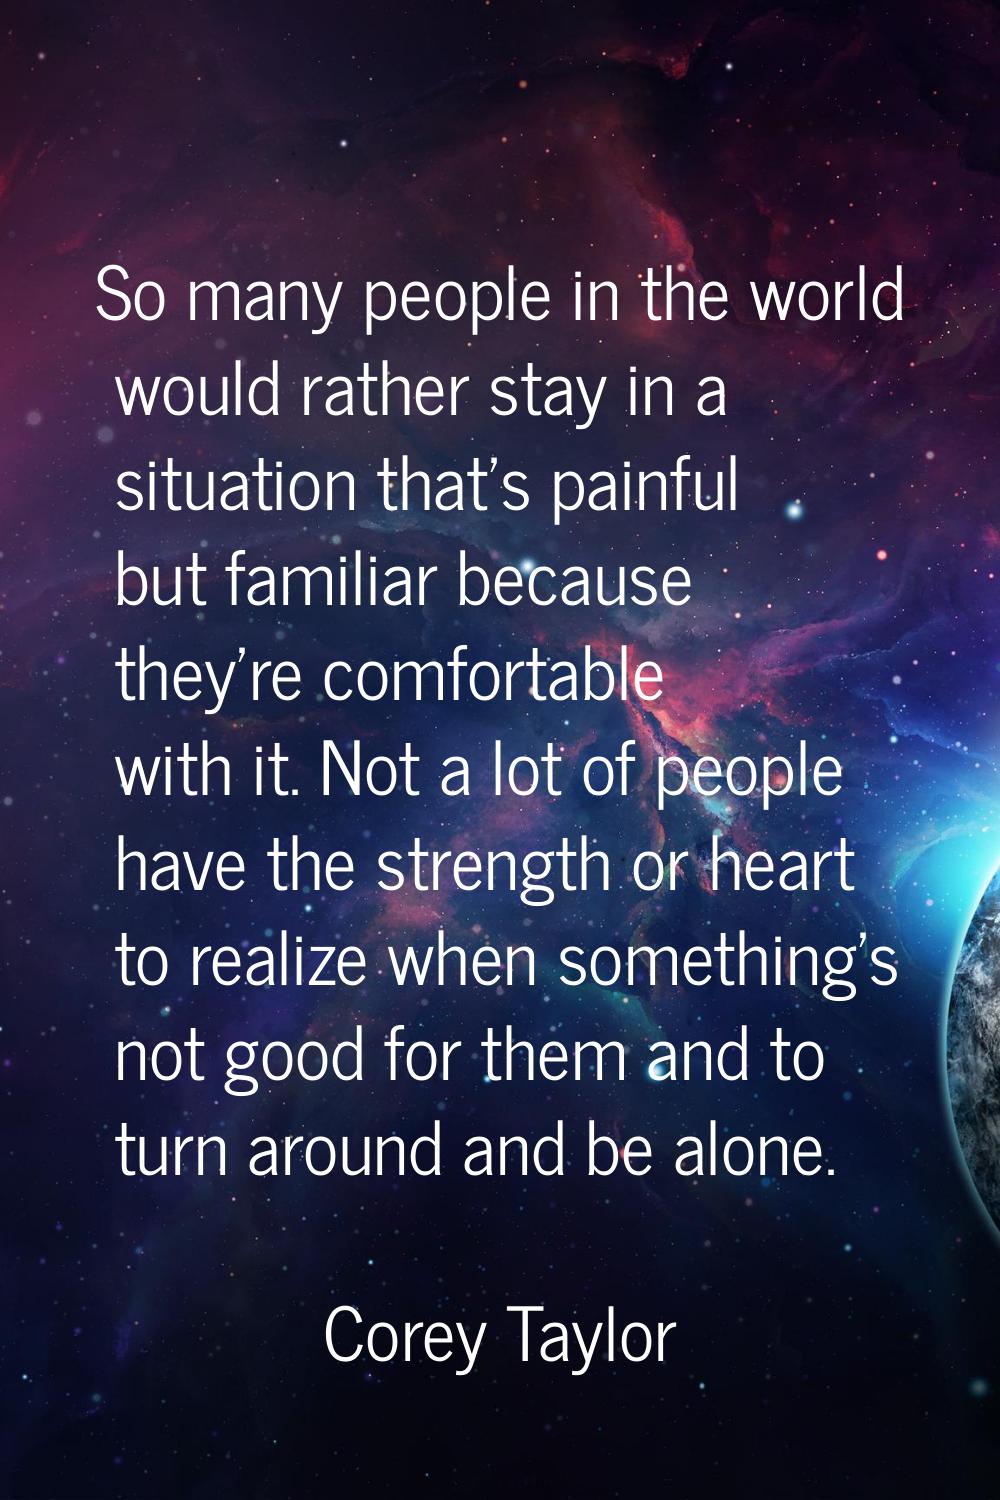 So many people in the world would rather stay in a situation that's painful but familiar because th